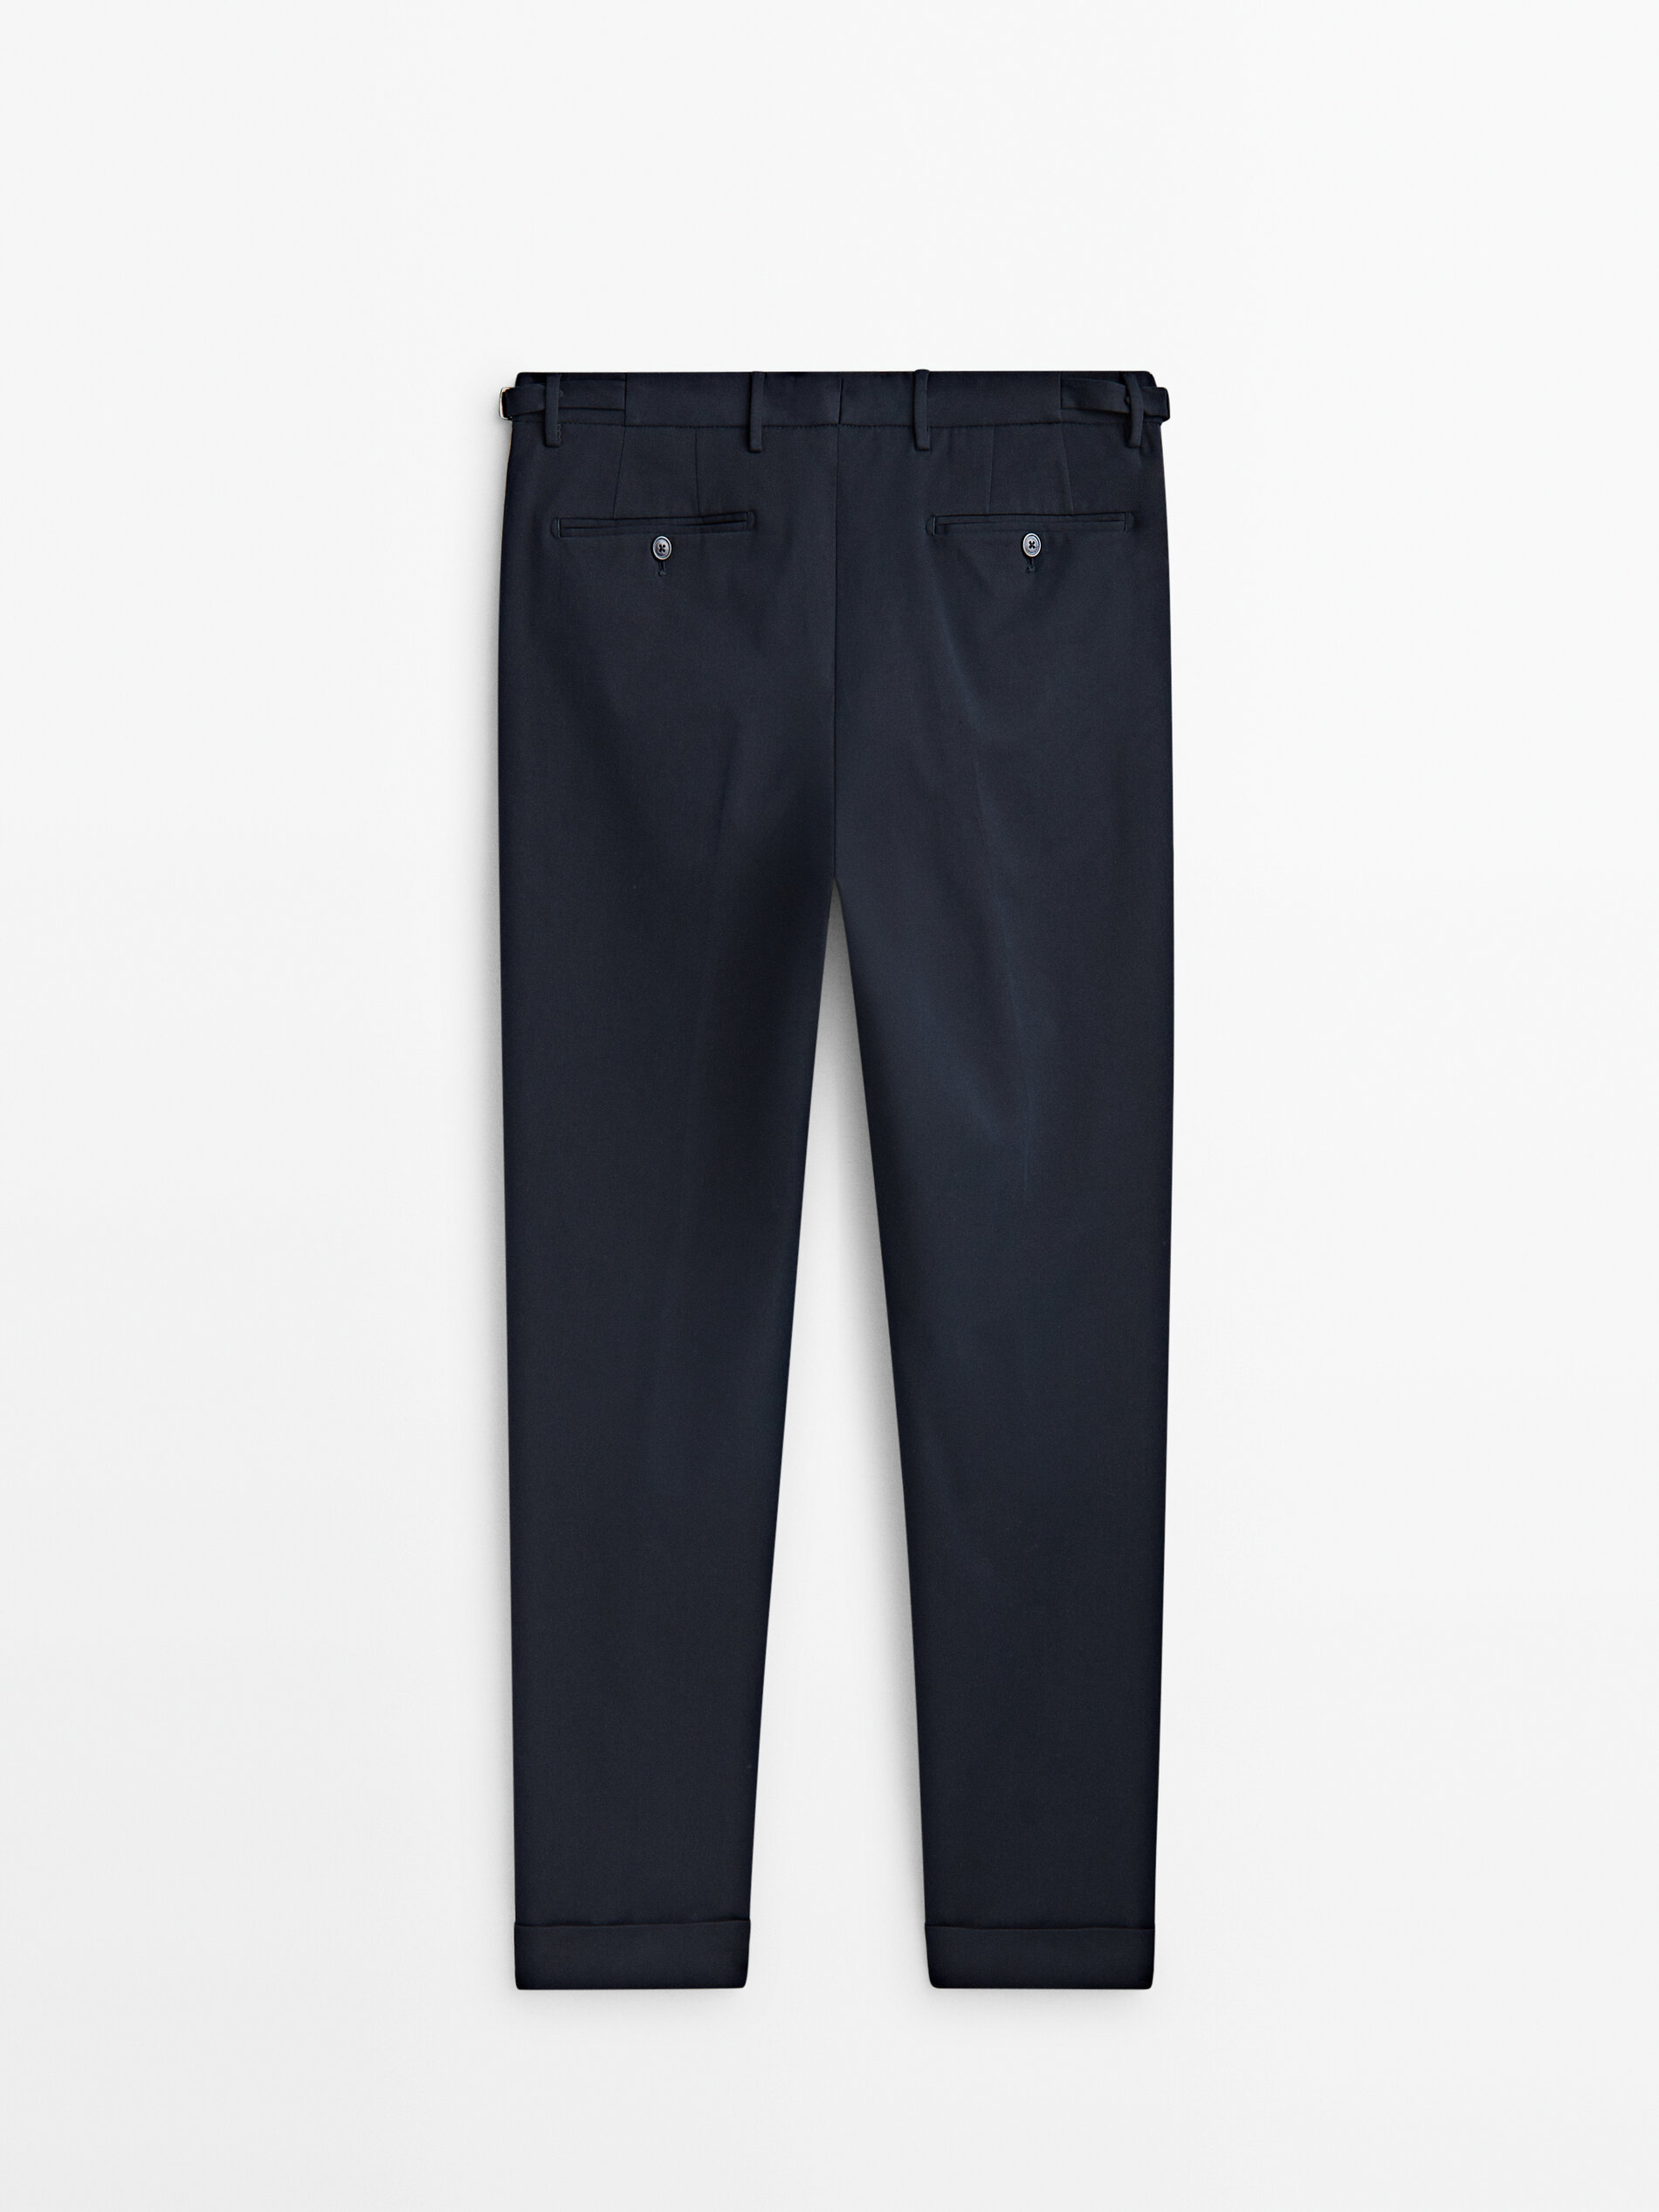 Mens Stretch Trousers in nylon on sale  FASHIOLAin